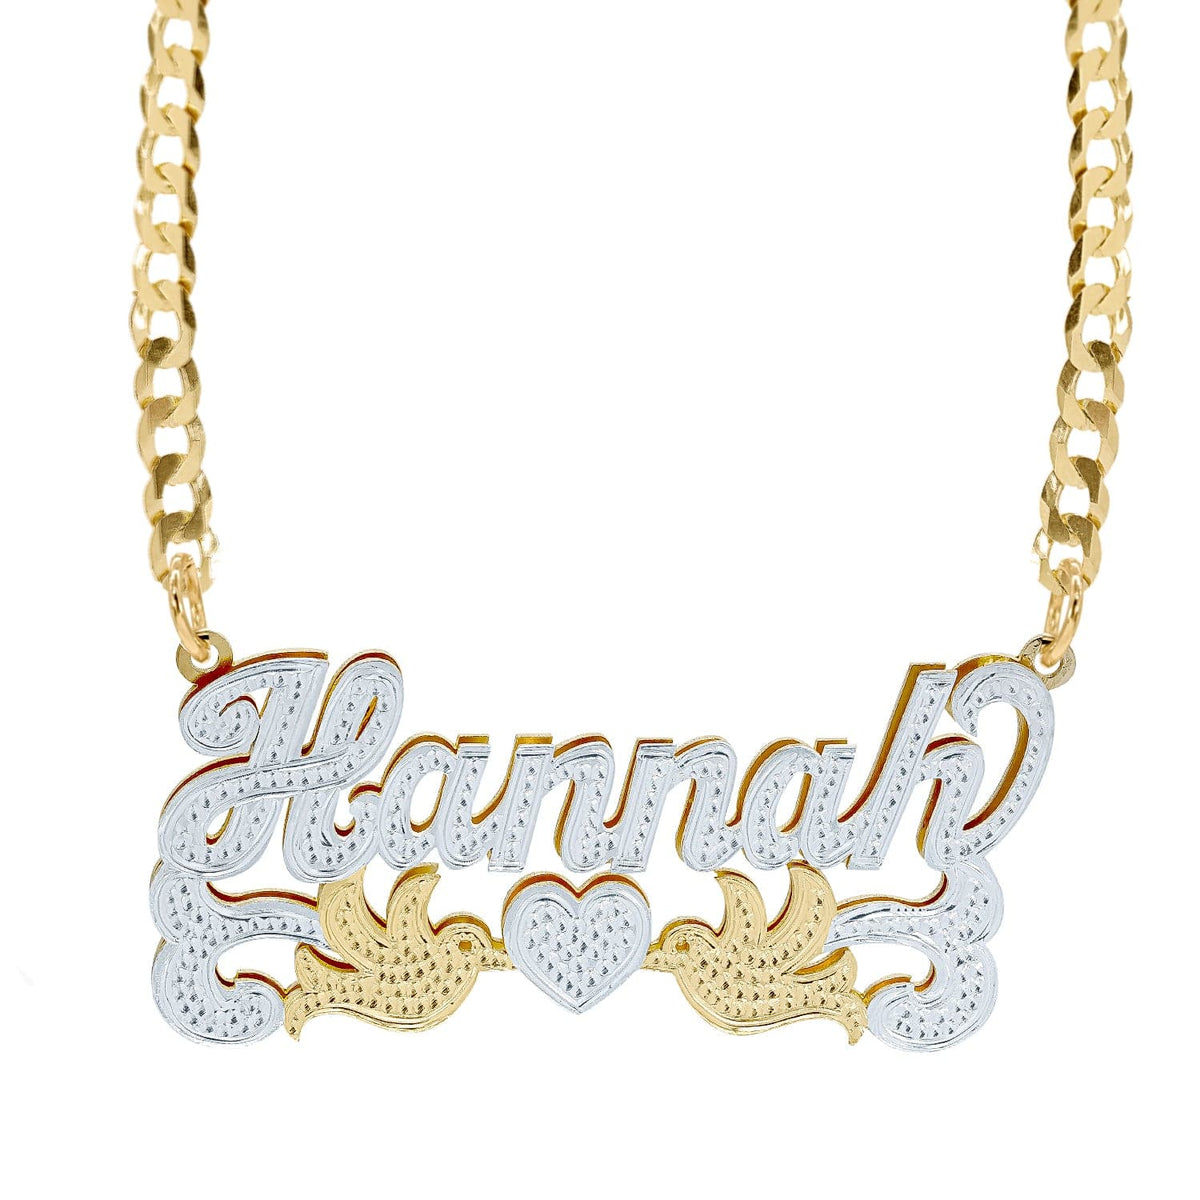 Solid Gold Double Nameplate Necklace w/ Love Birds Hannah 